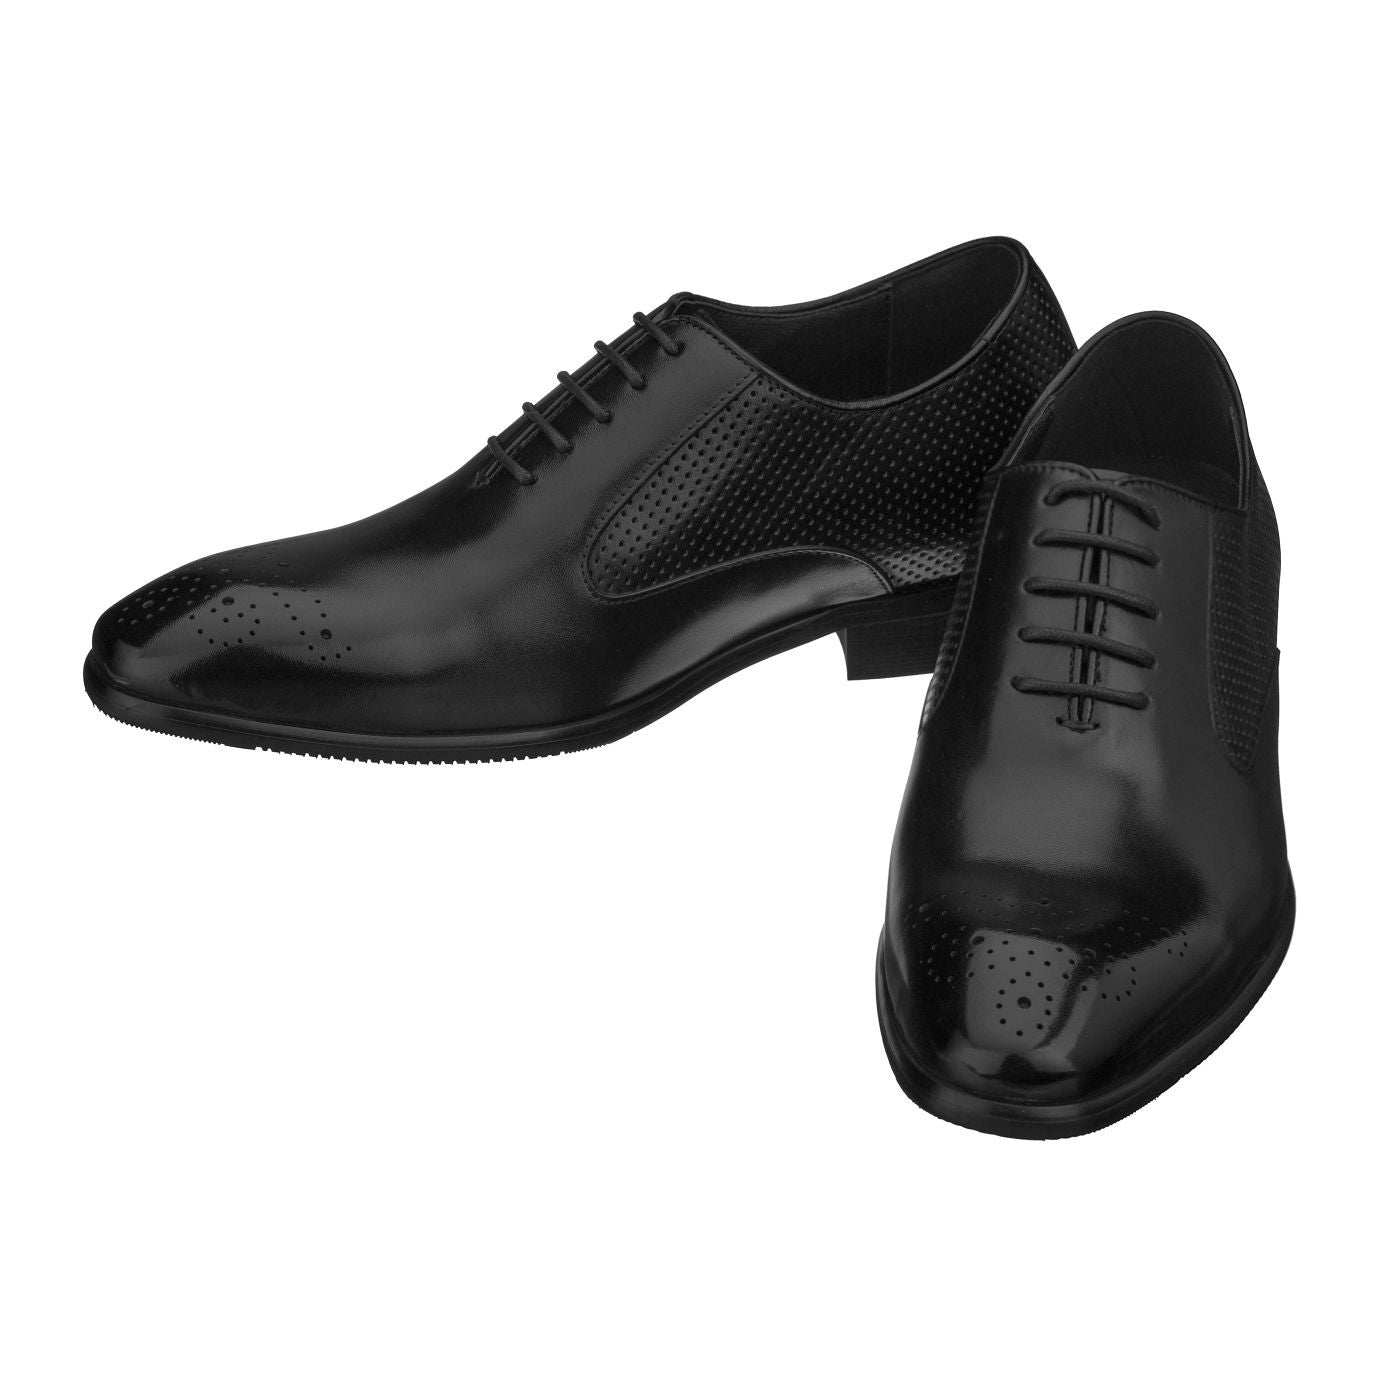 Elevator shoes height increase CALTO - Y6012 - 2.4 Inches Taller (Black)